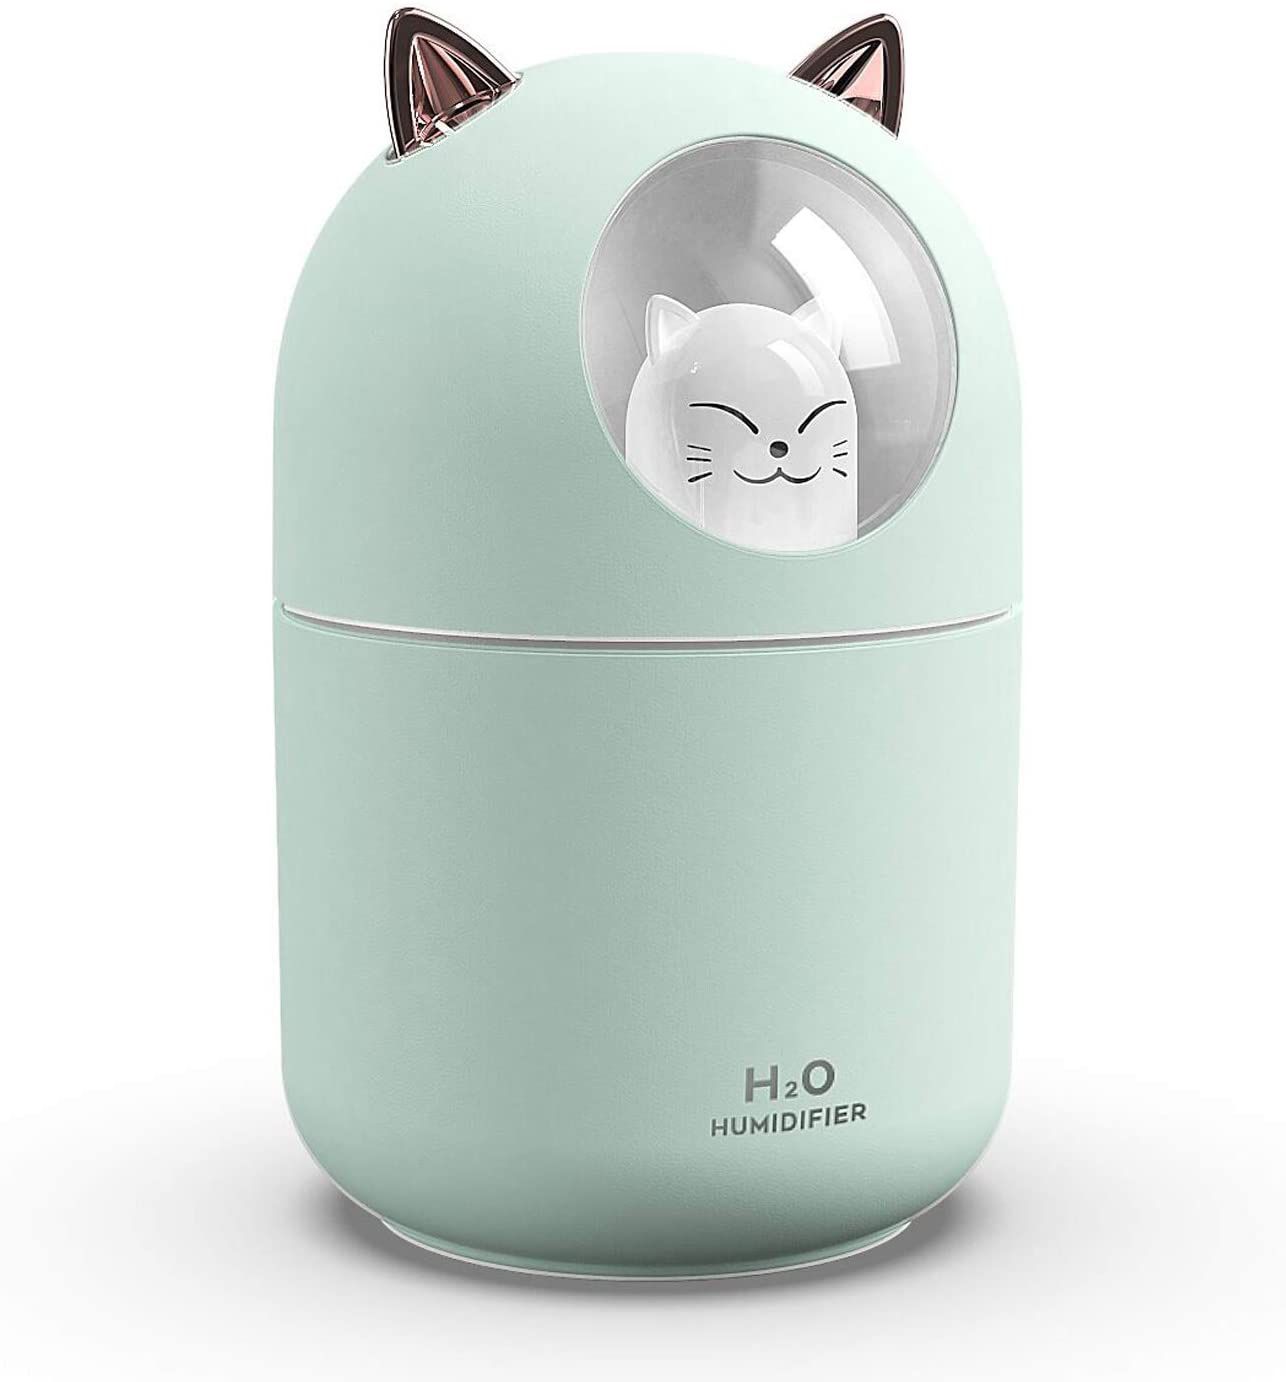 humidifiers for bedroom ，small humidifier plant humidifier for Office with High and Low Mist Settings , 2 Mist Modes, Super Quiet,Up to 12 Hours (whit